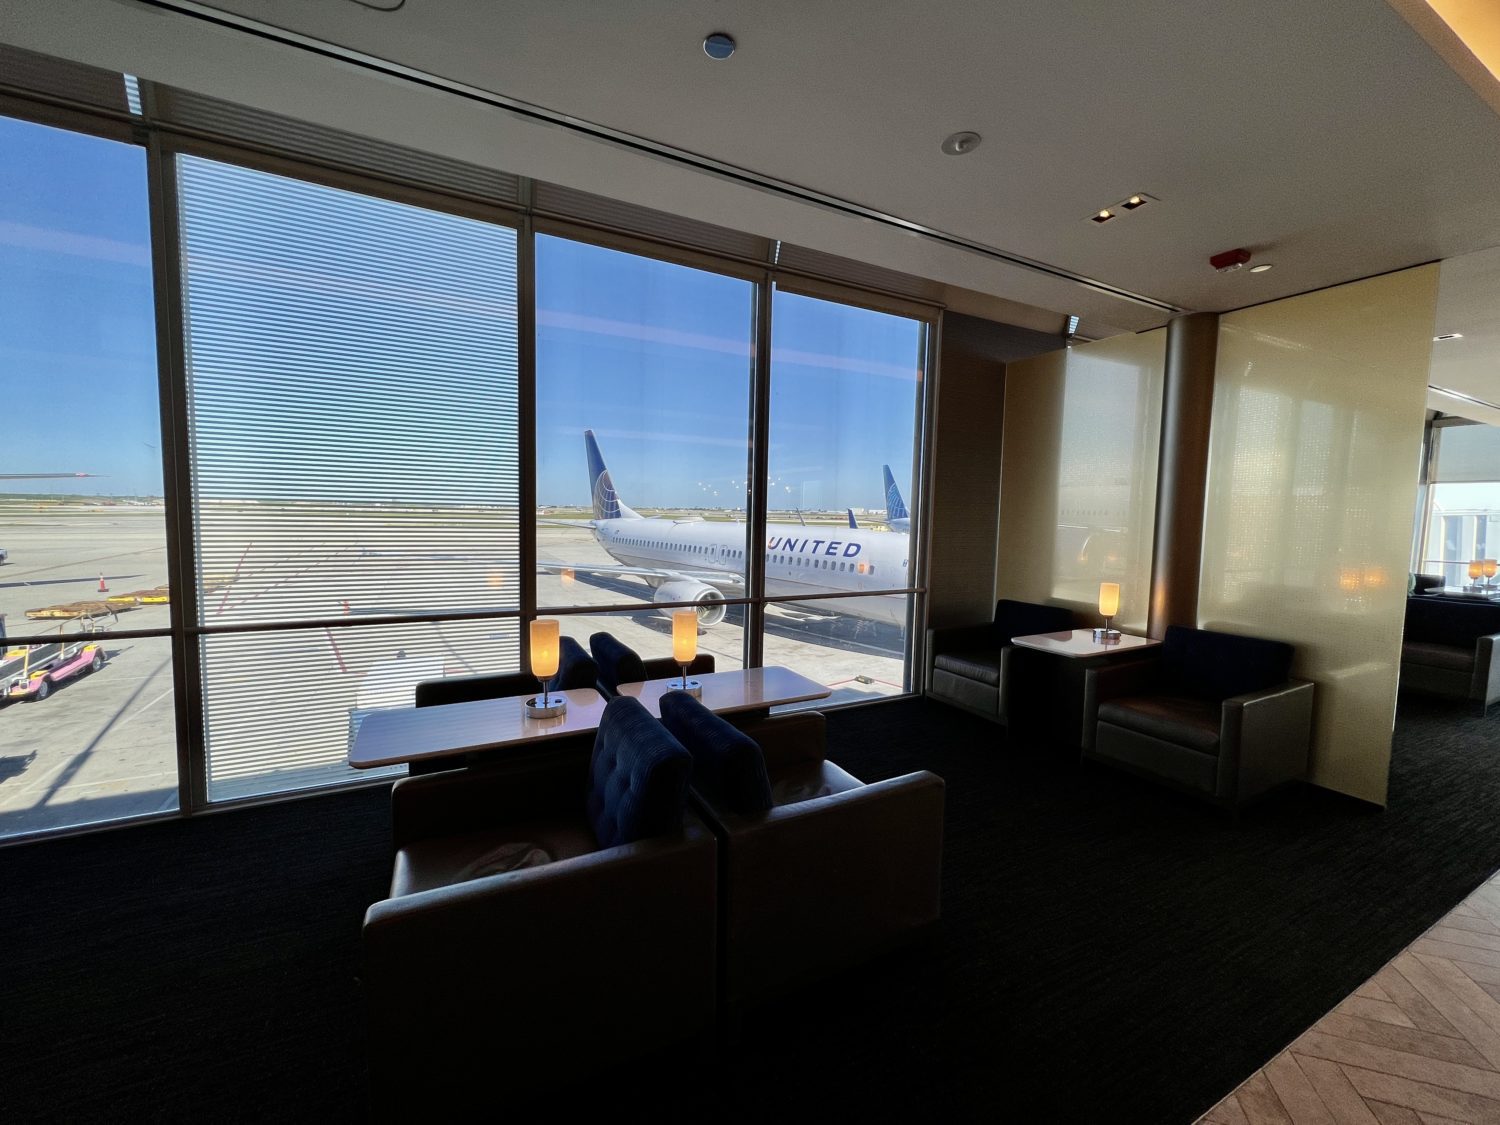 united polaris lounge chicago seating   Review: United Polaris Lounge Chicago (ORD) &#8211; Thrifty Traveler united polaris lounge chicago seating 4 scaled